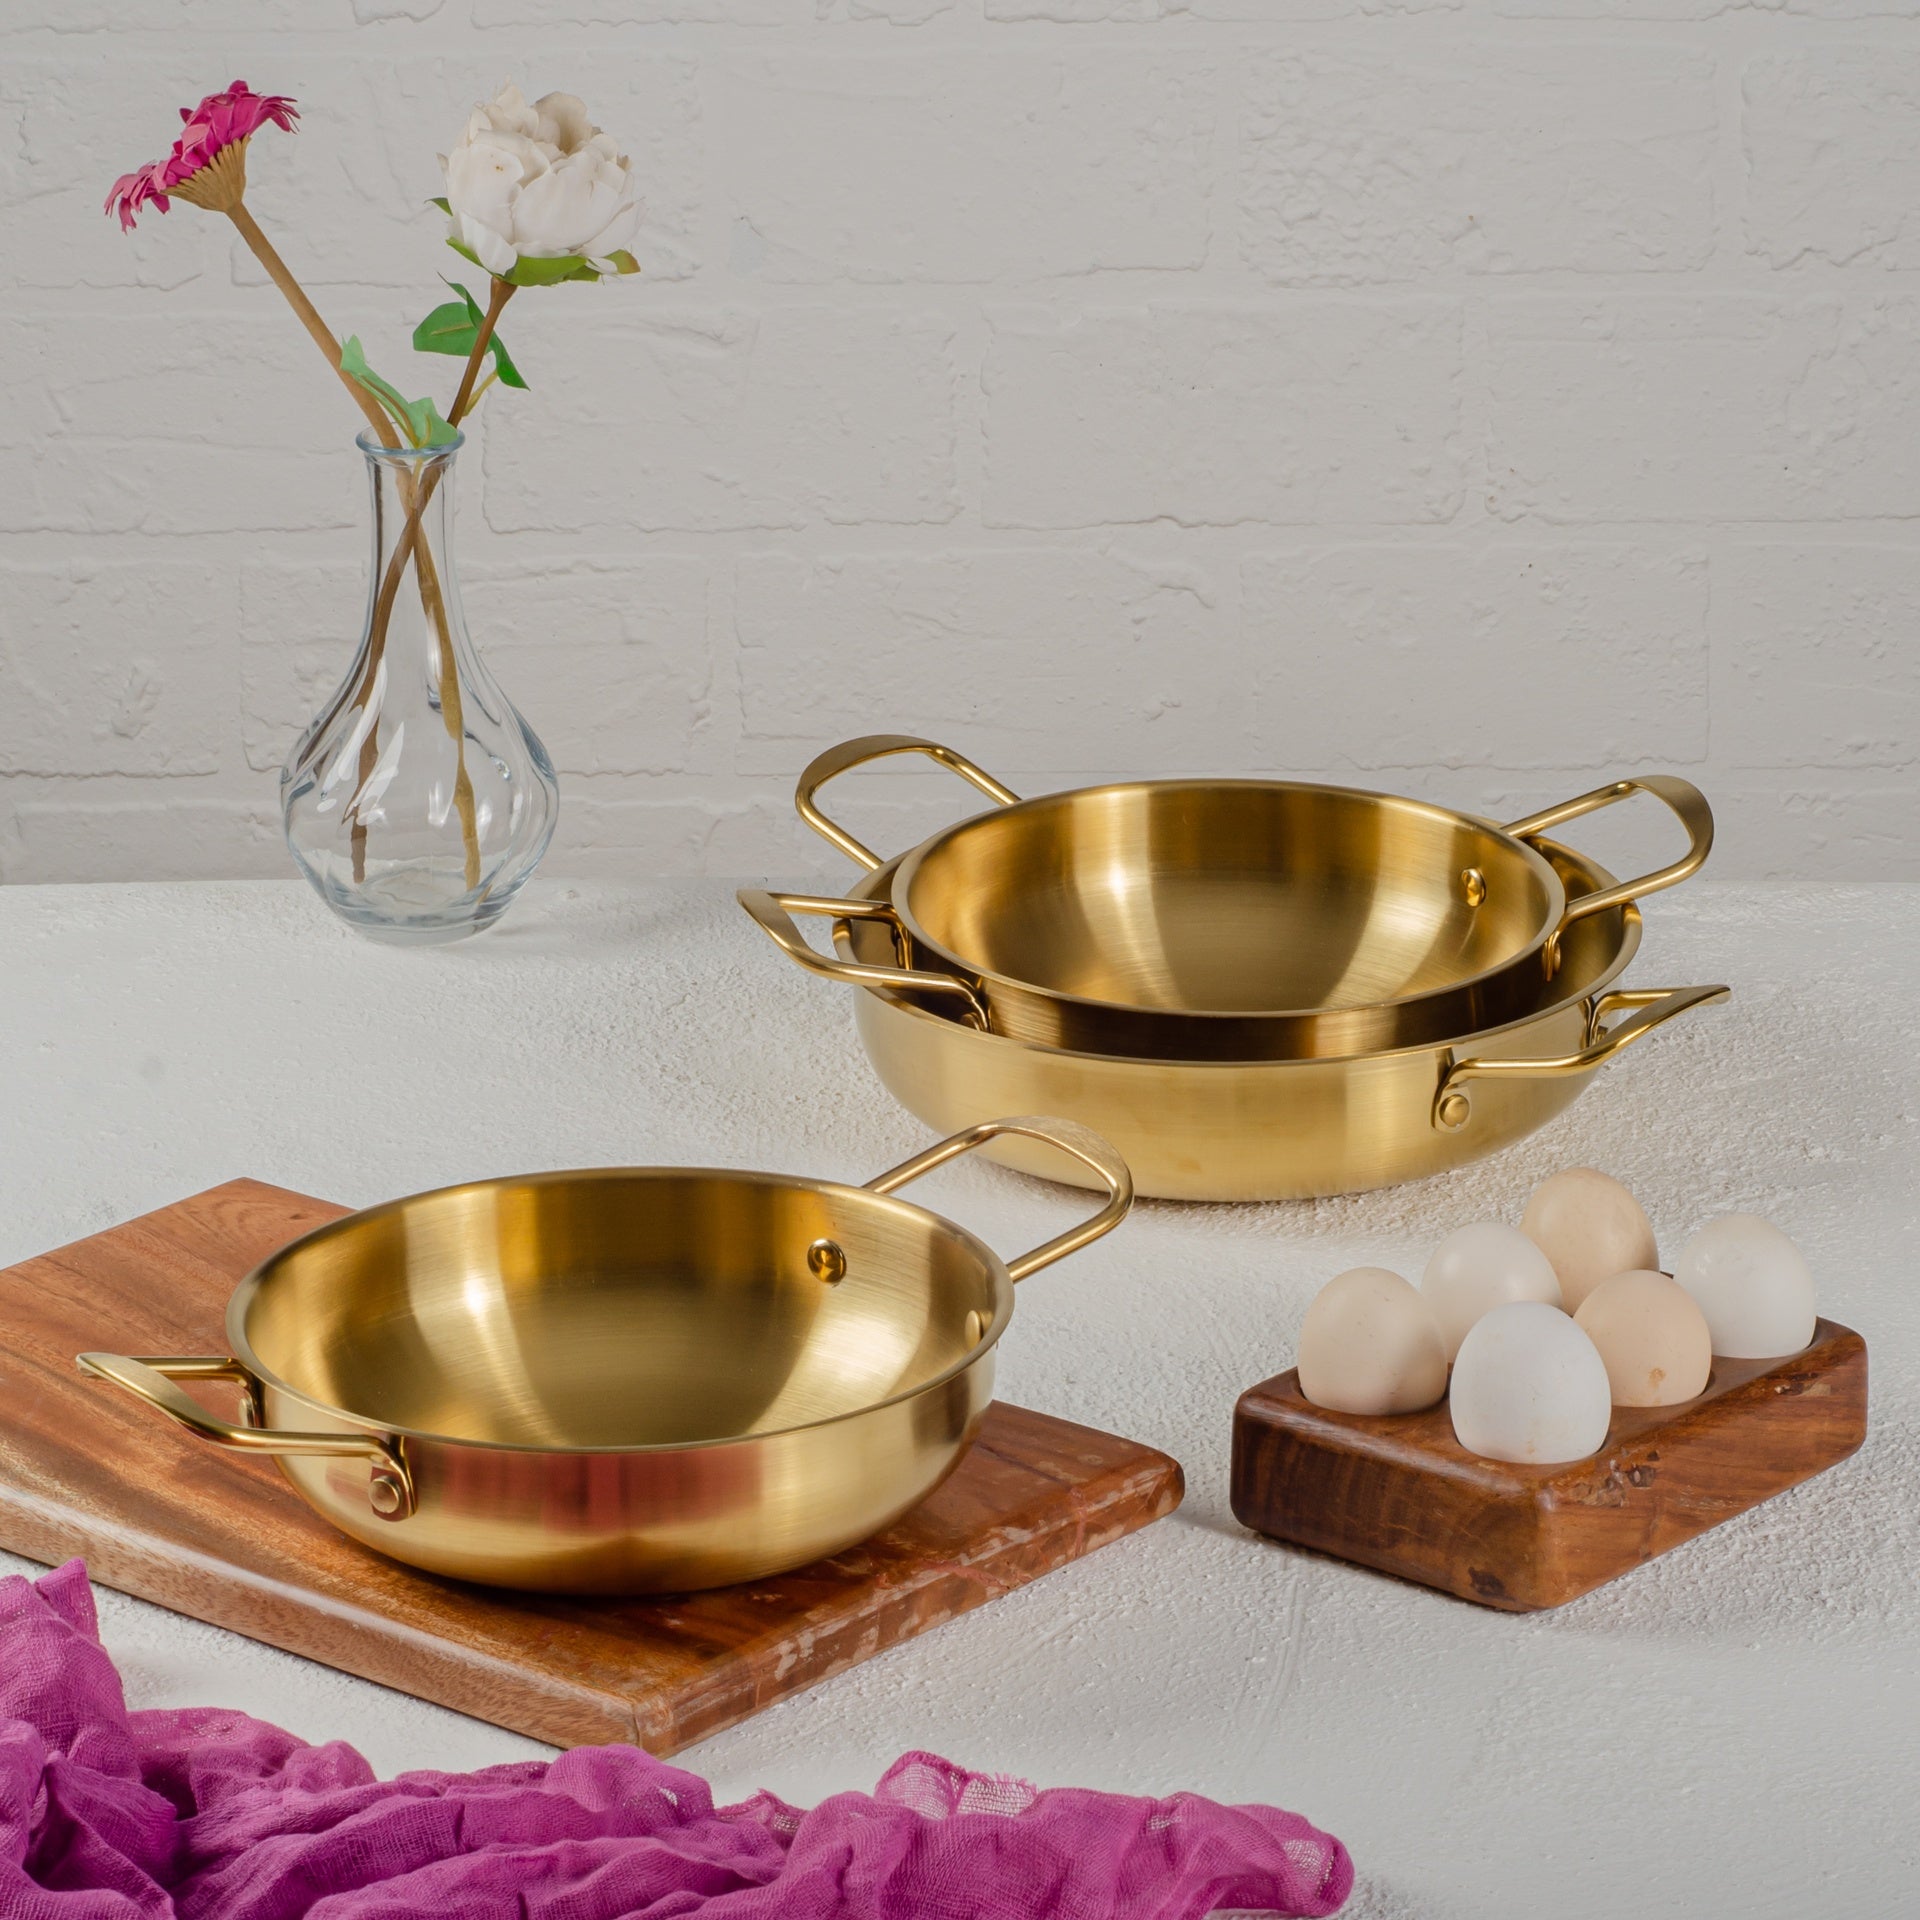 Golden Stainless Pans